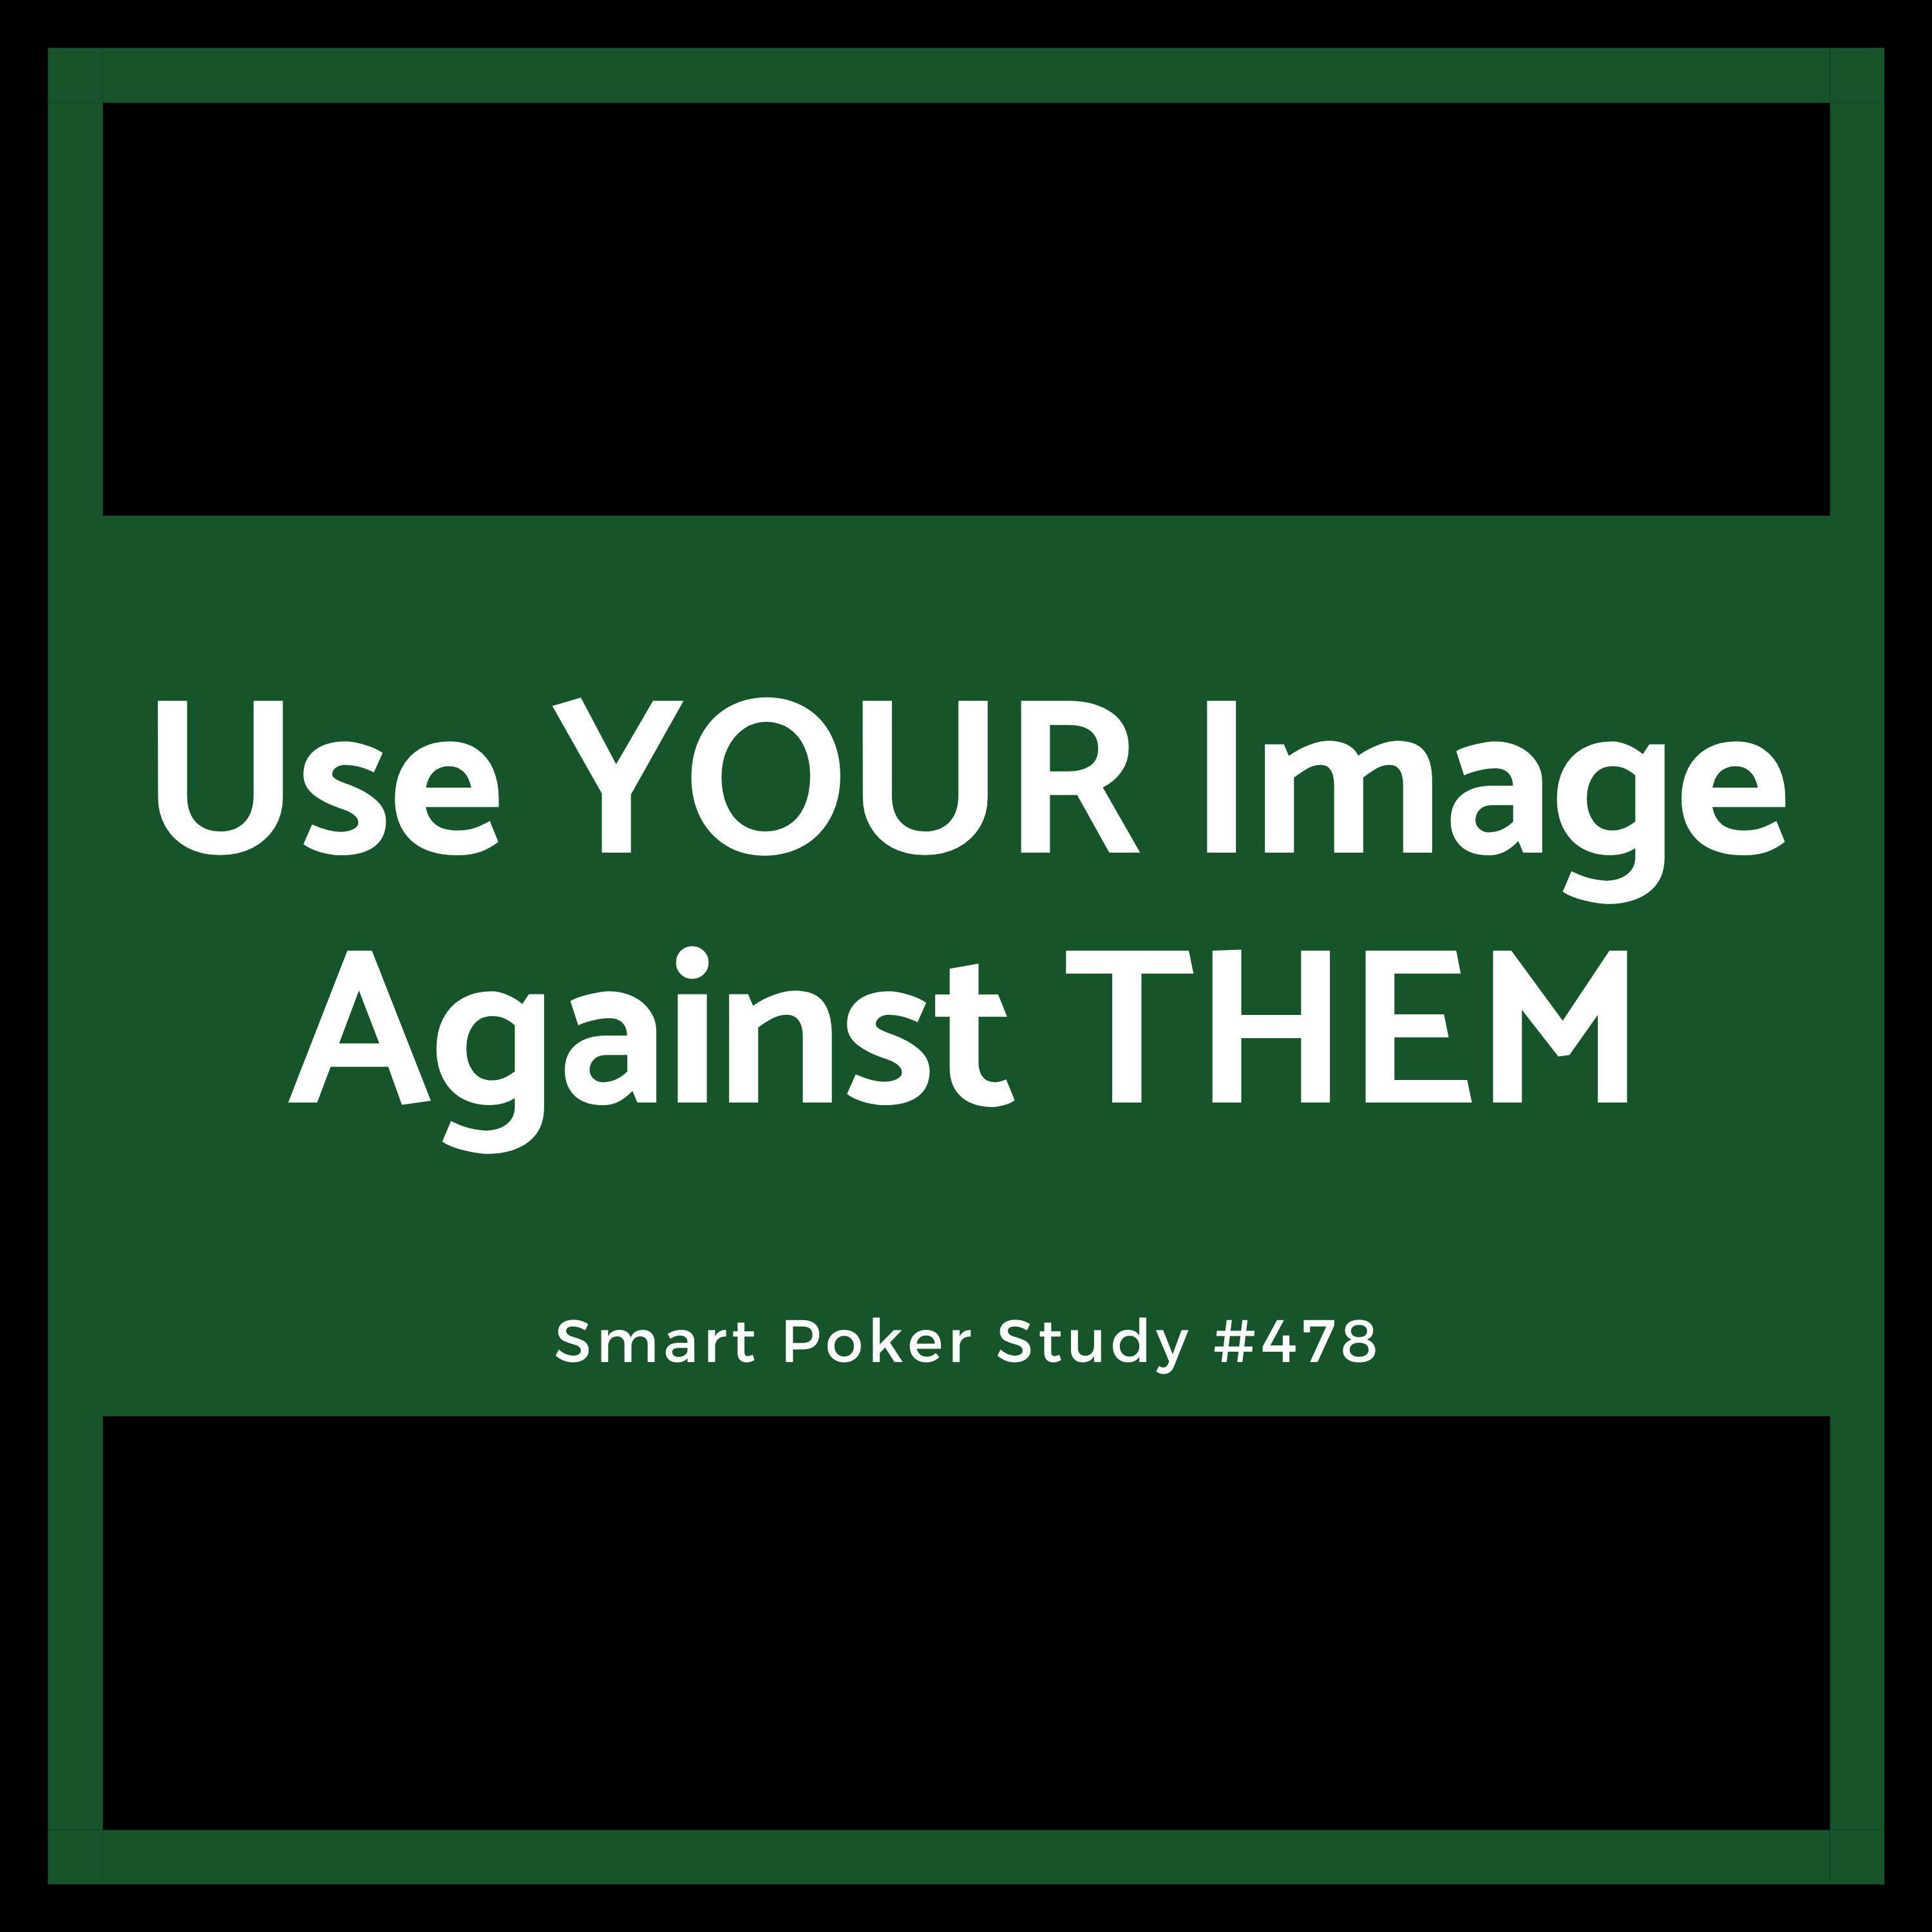 Use YOUR Table Image Against THEM #478